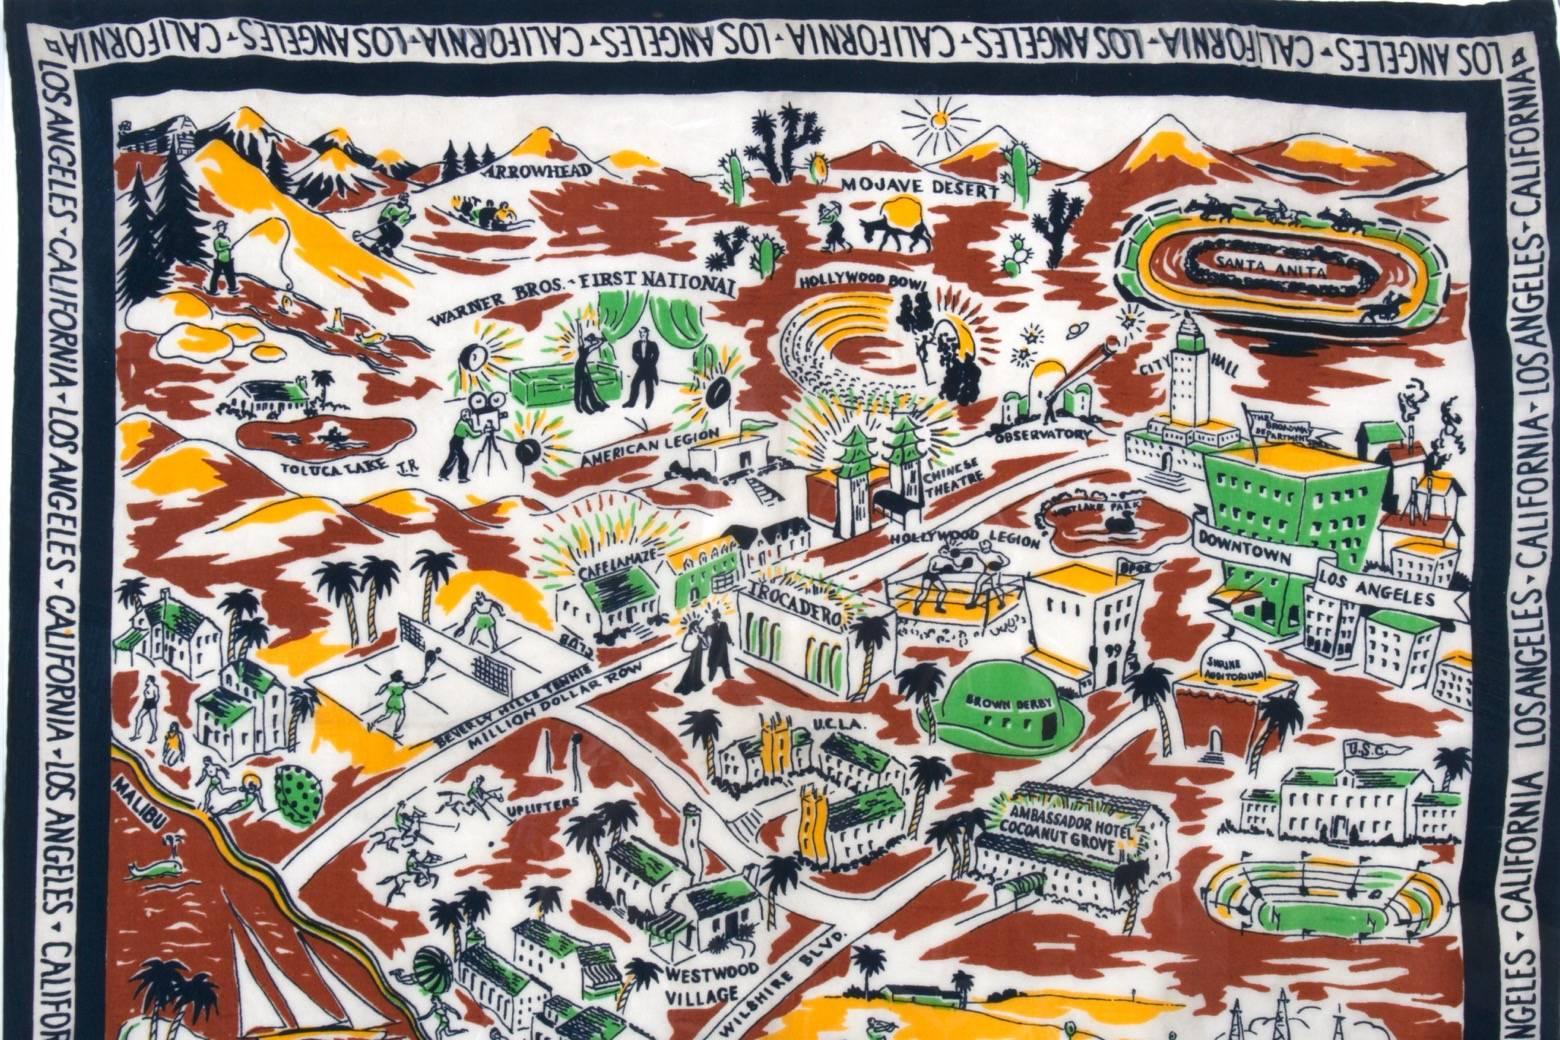 Southern California Pictorial Tourist Scarf, circa 1930s, framed wall art decoration. Fabulous 1930s tourist scarf romancing all the sights and activities
of Southern California, from San Louis Obispo down to San Diego.
it's all on this wonderful